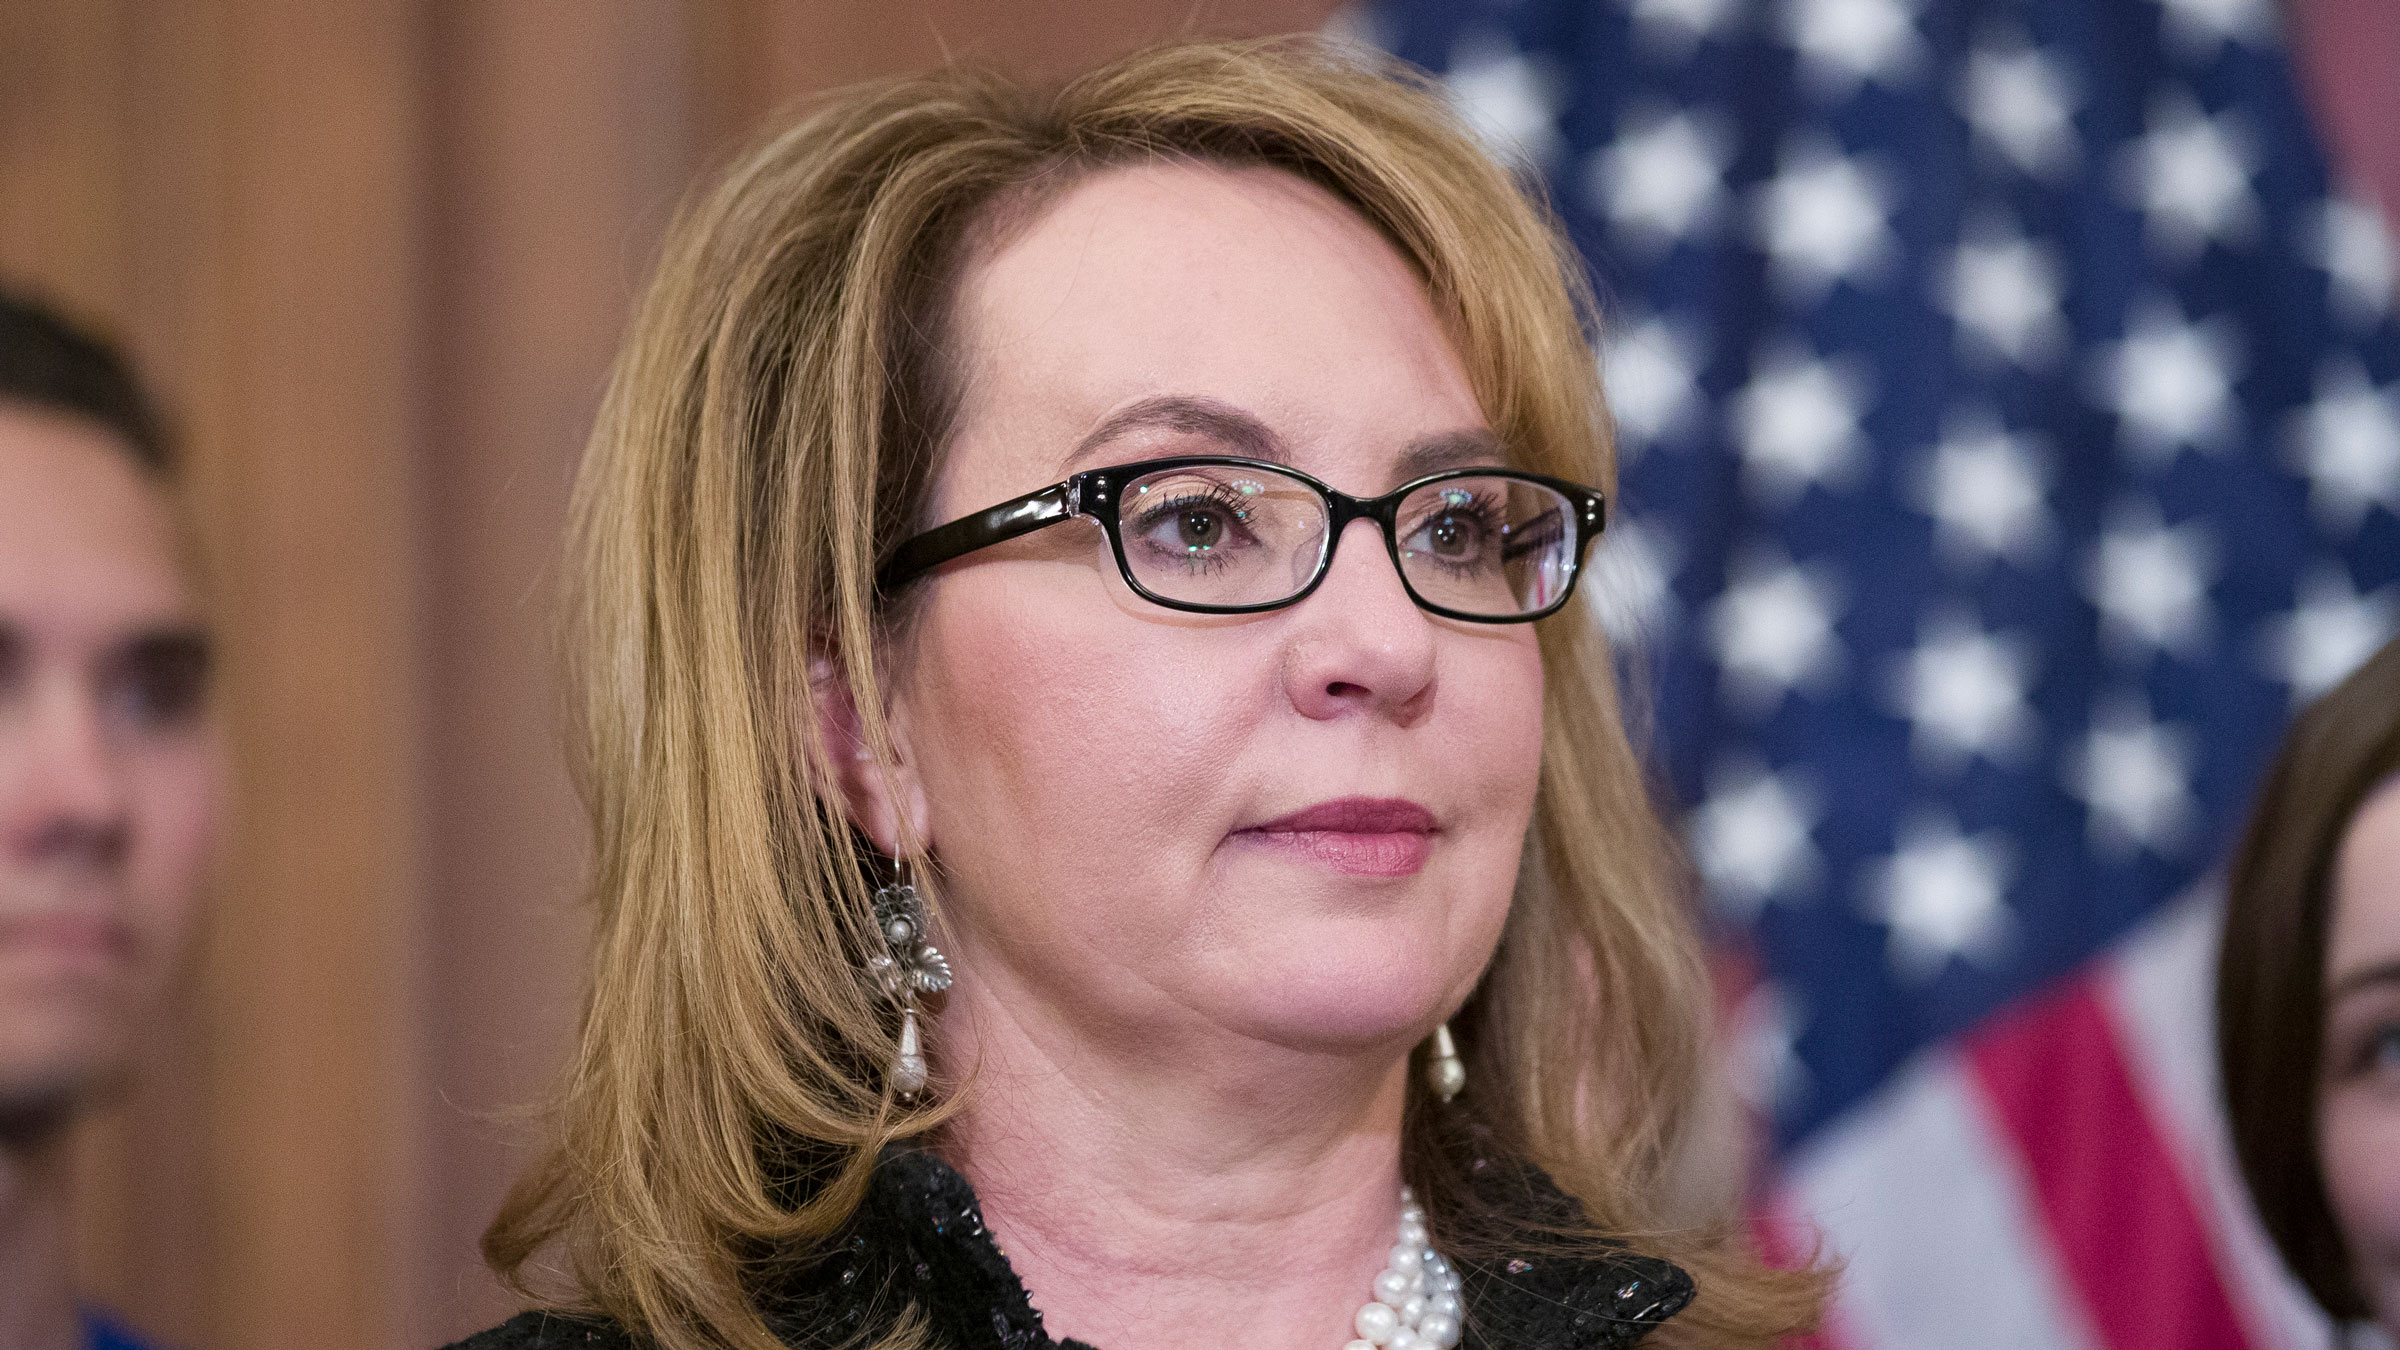 Former US Rep. Gabby Giffords is among those receiving a Medal of Freedom today.